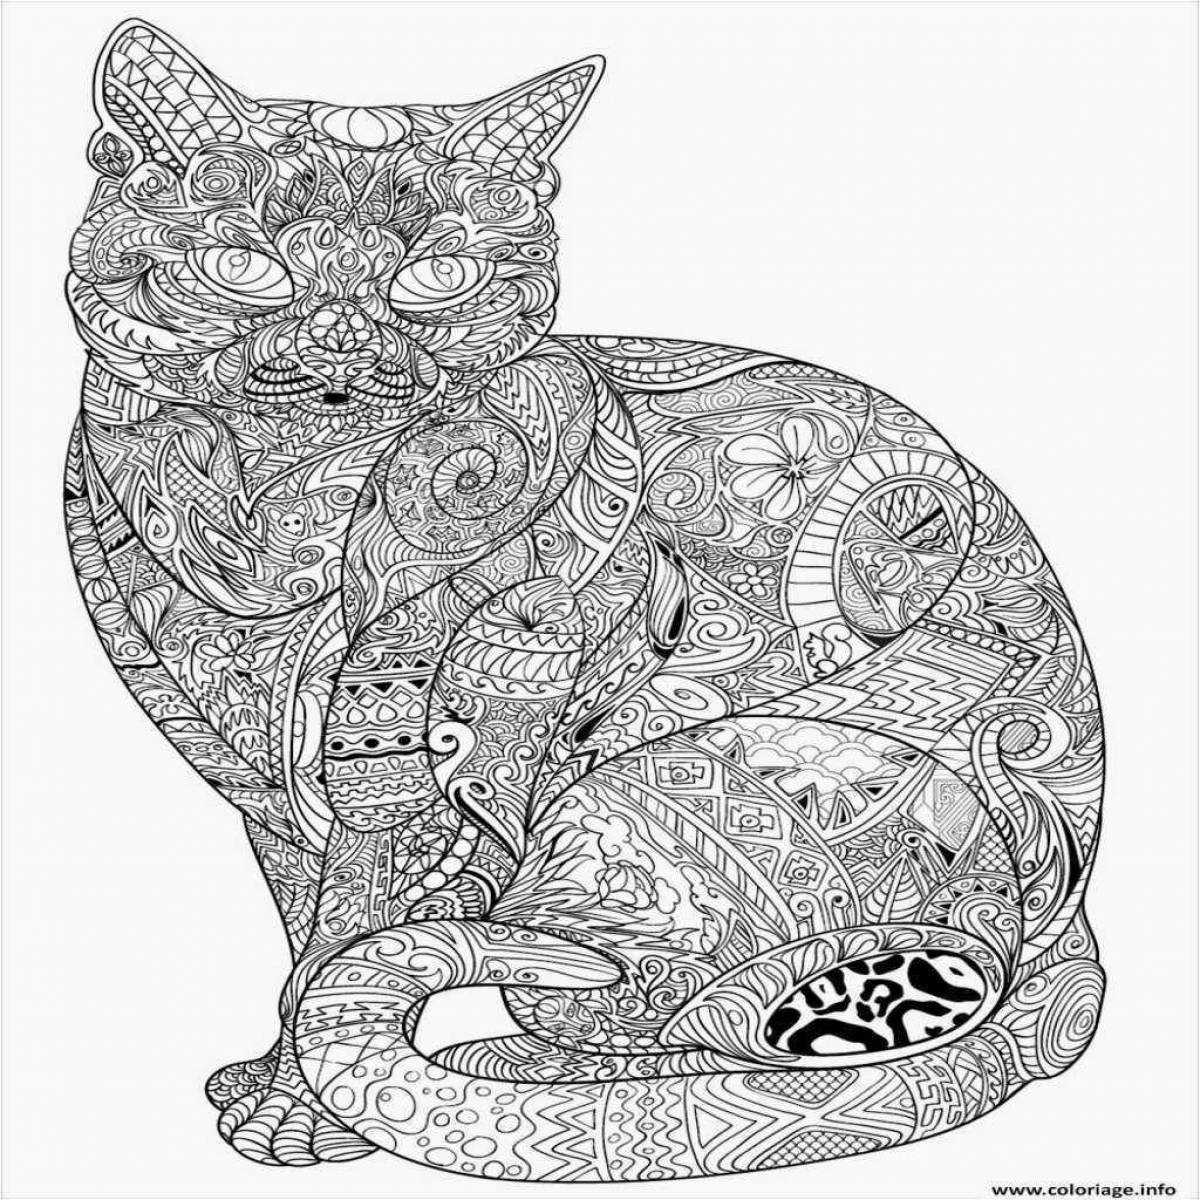 Fun soothing coloring pages